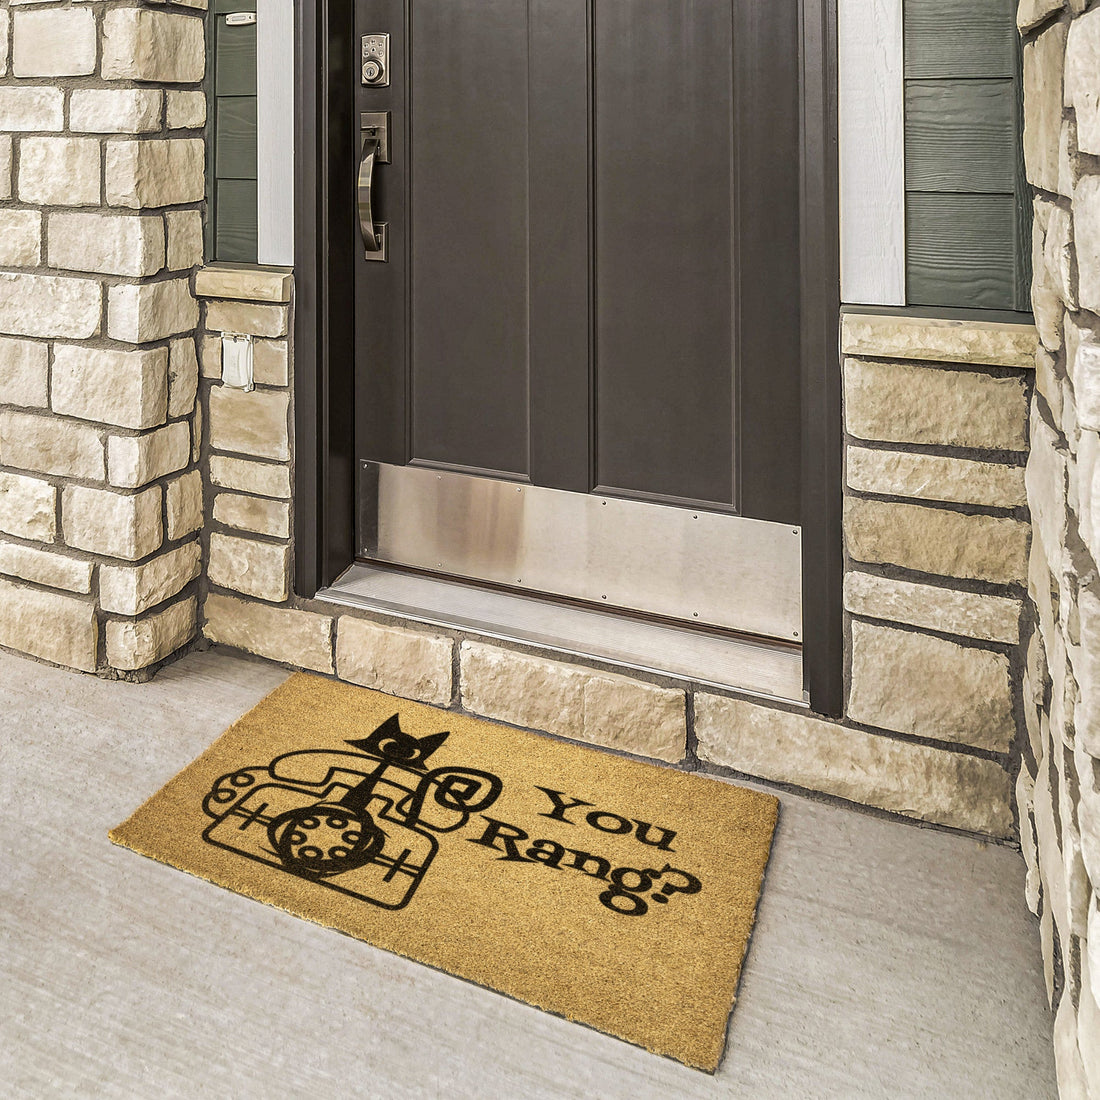 Atomic Cat Mid Century Modern Welcome Mat, Funny Quirky, You Rang, Nostalgic Rotary Phone Home Goods